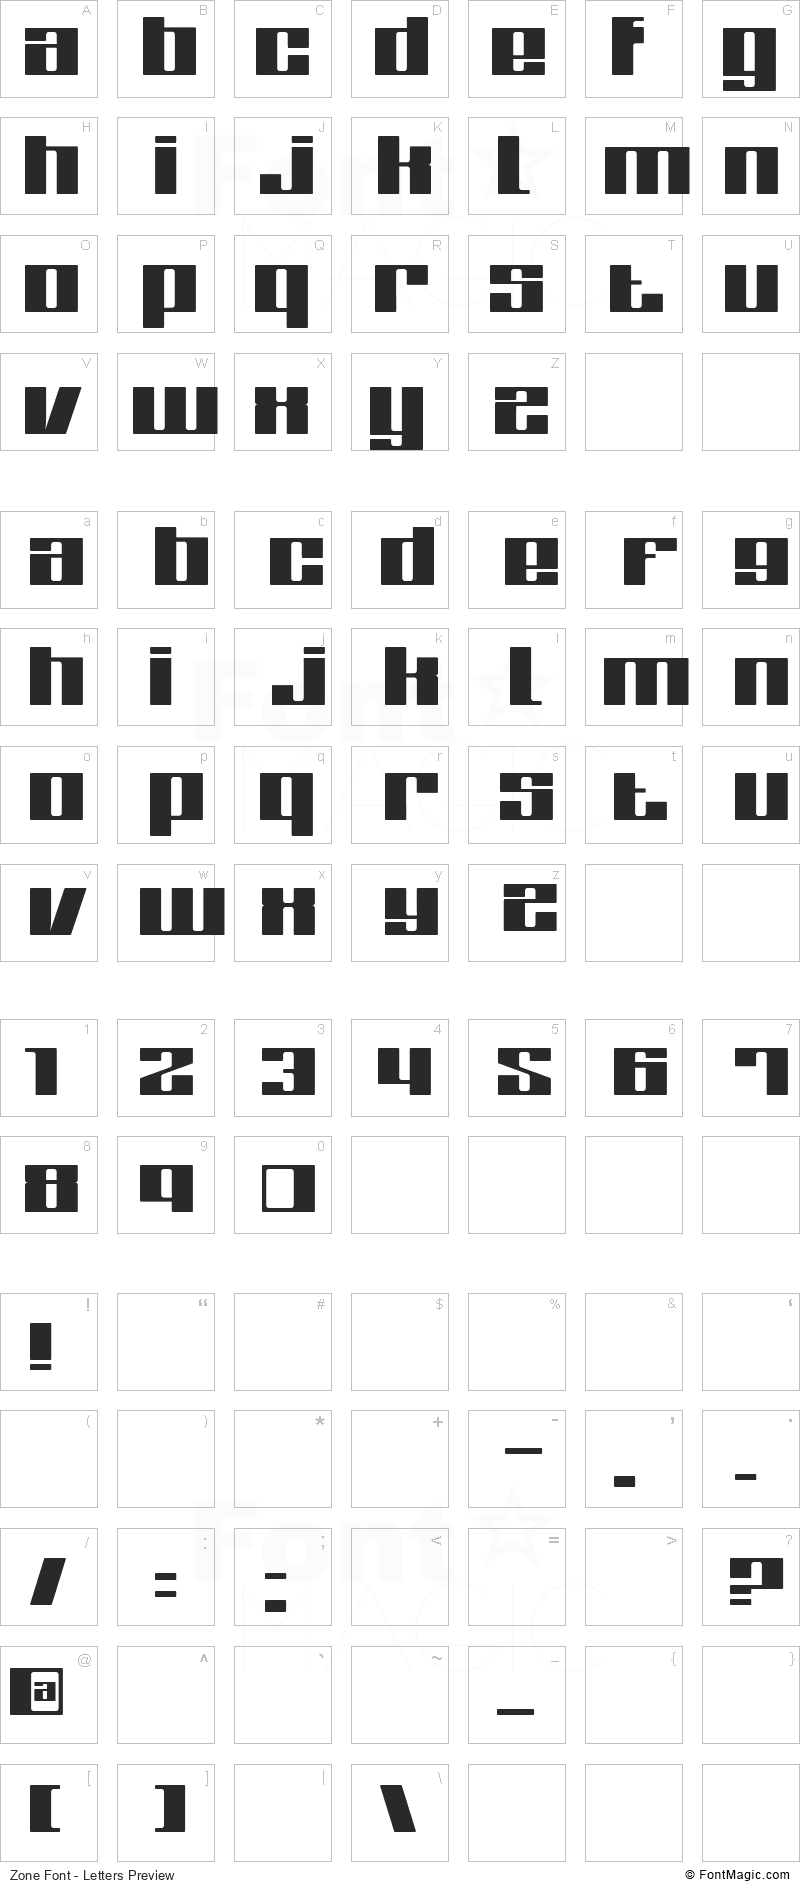 Zone Font - All Latters Preview Chart